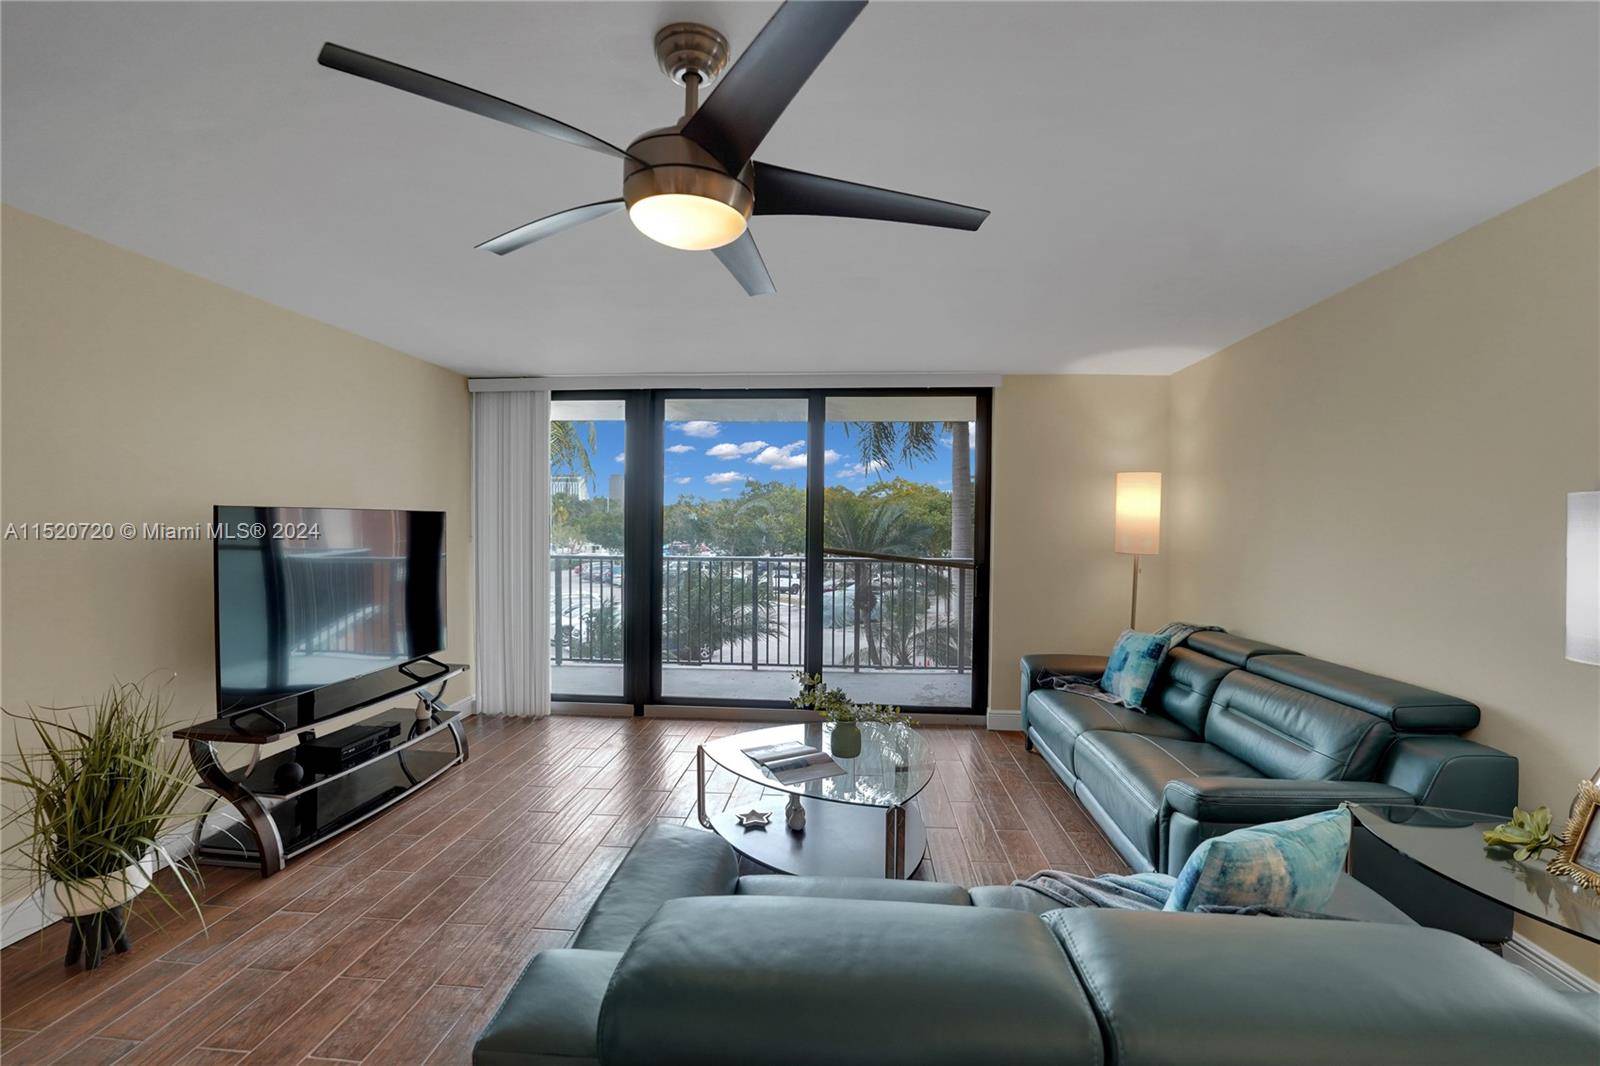 CITY CANAL VIEW REMODELED 2 BED 2 BATH CONDO WITH GARAGED PARKING.